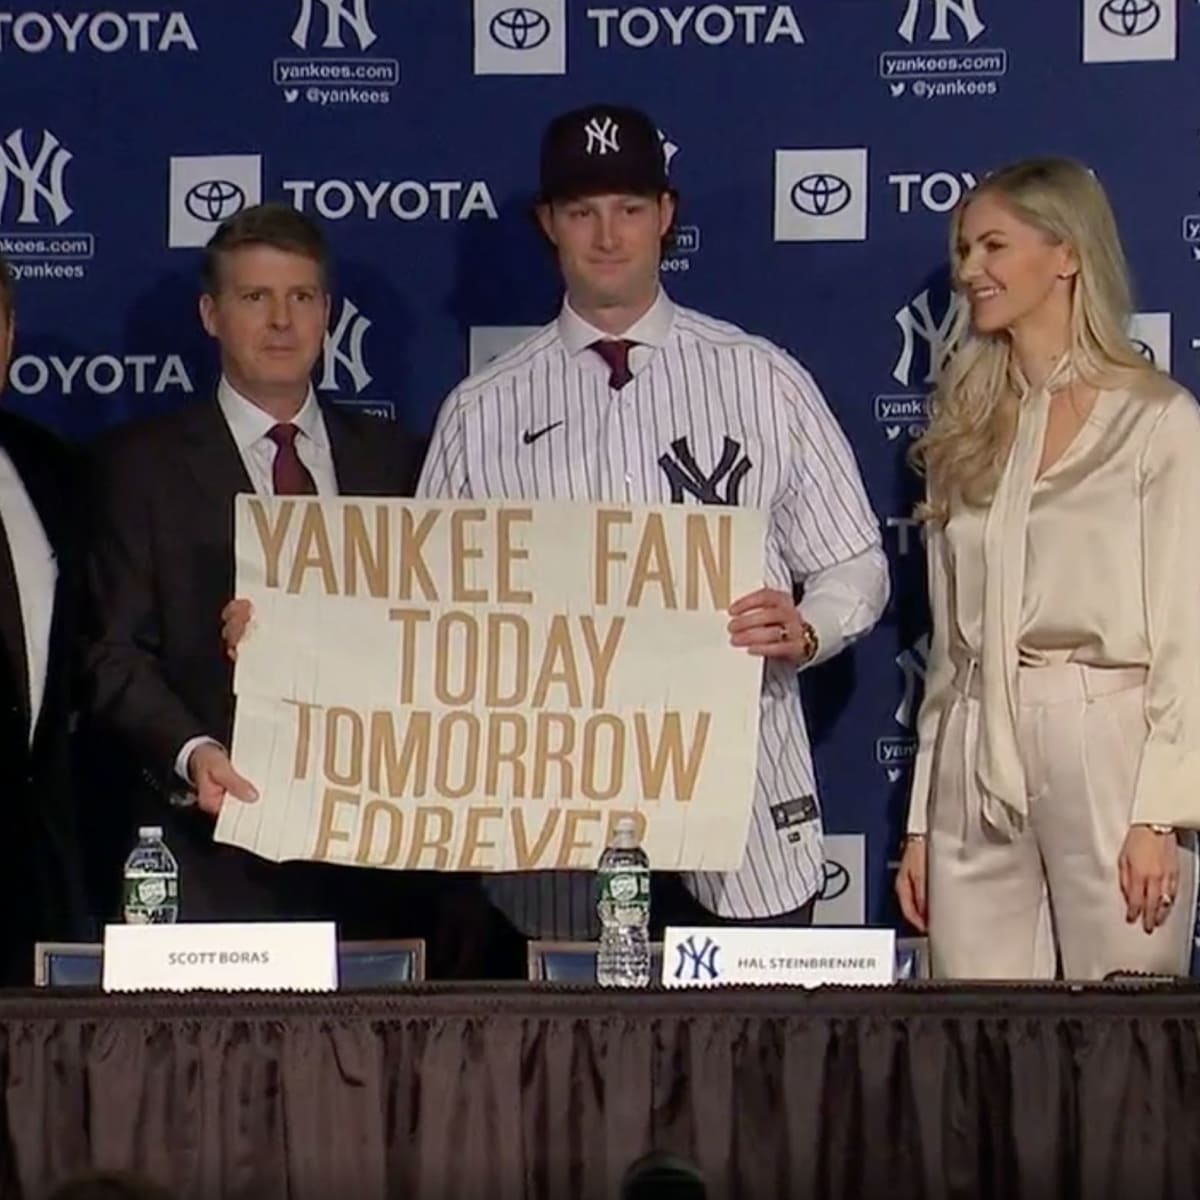 Gerrit Cole's 'Yankee Fan Today Tomorrow Forever' sign is perfect 